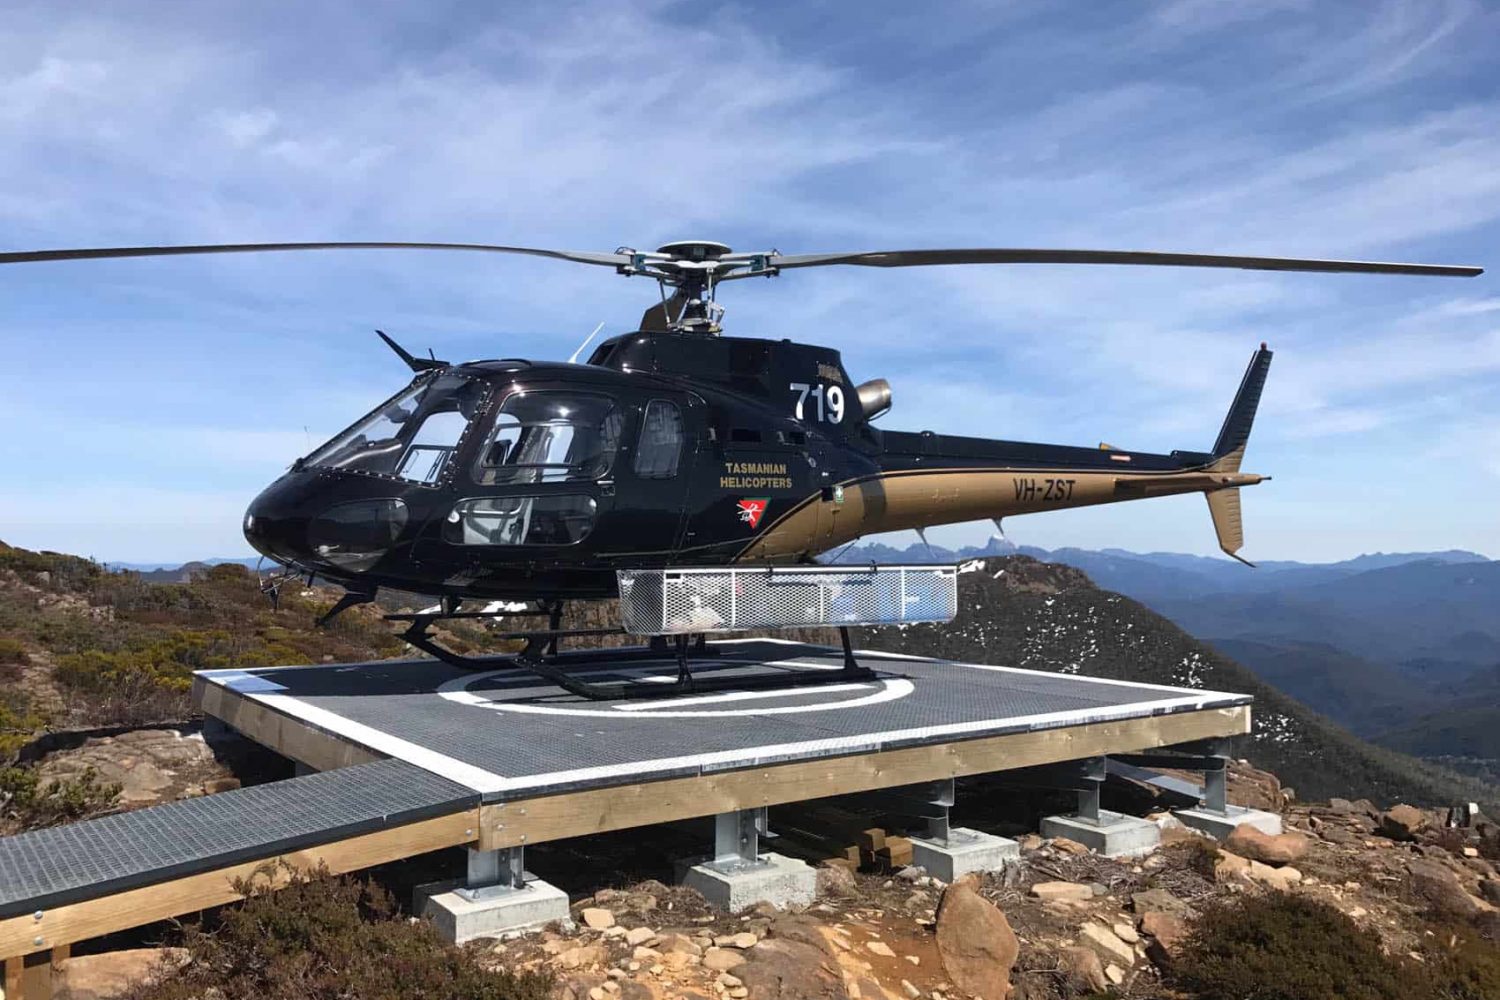 Tasmanian Helicopters 7